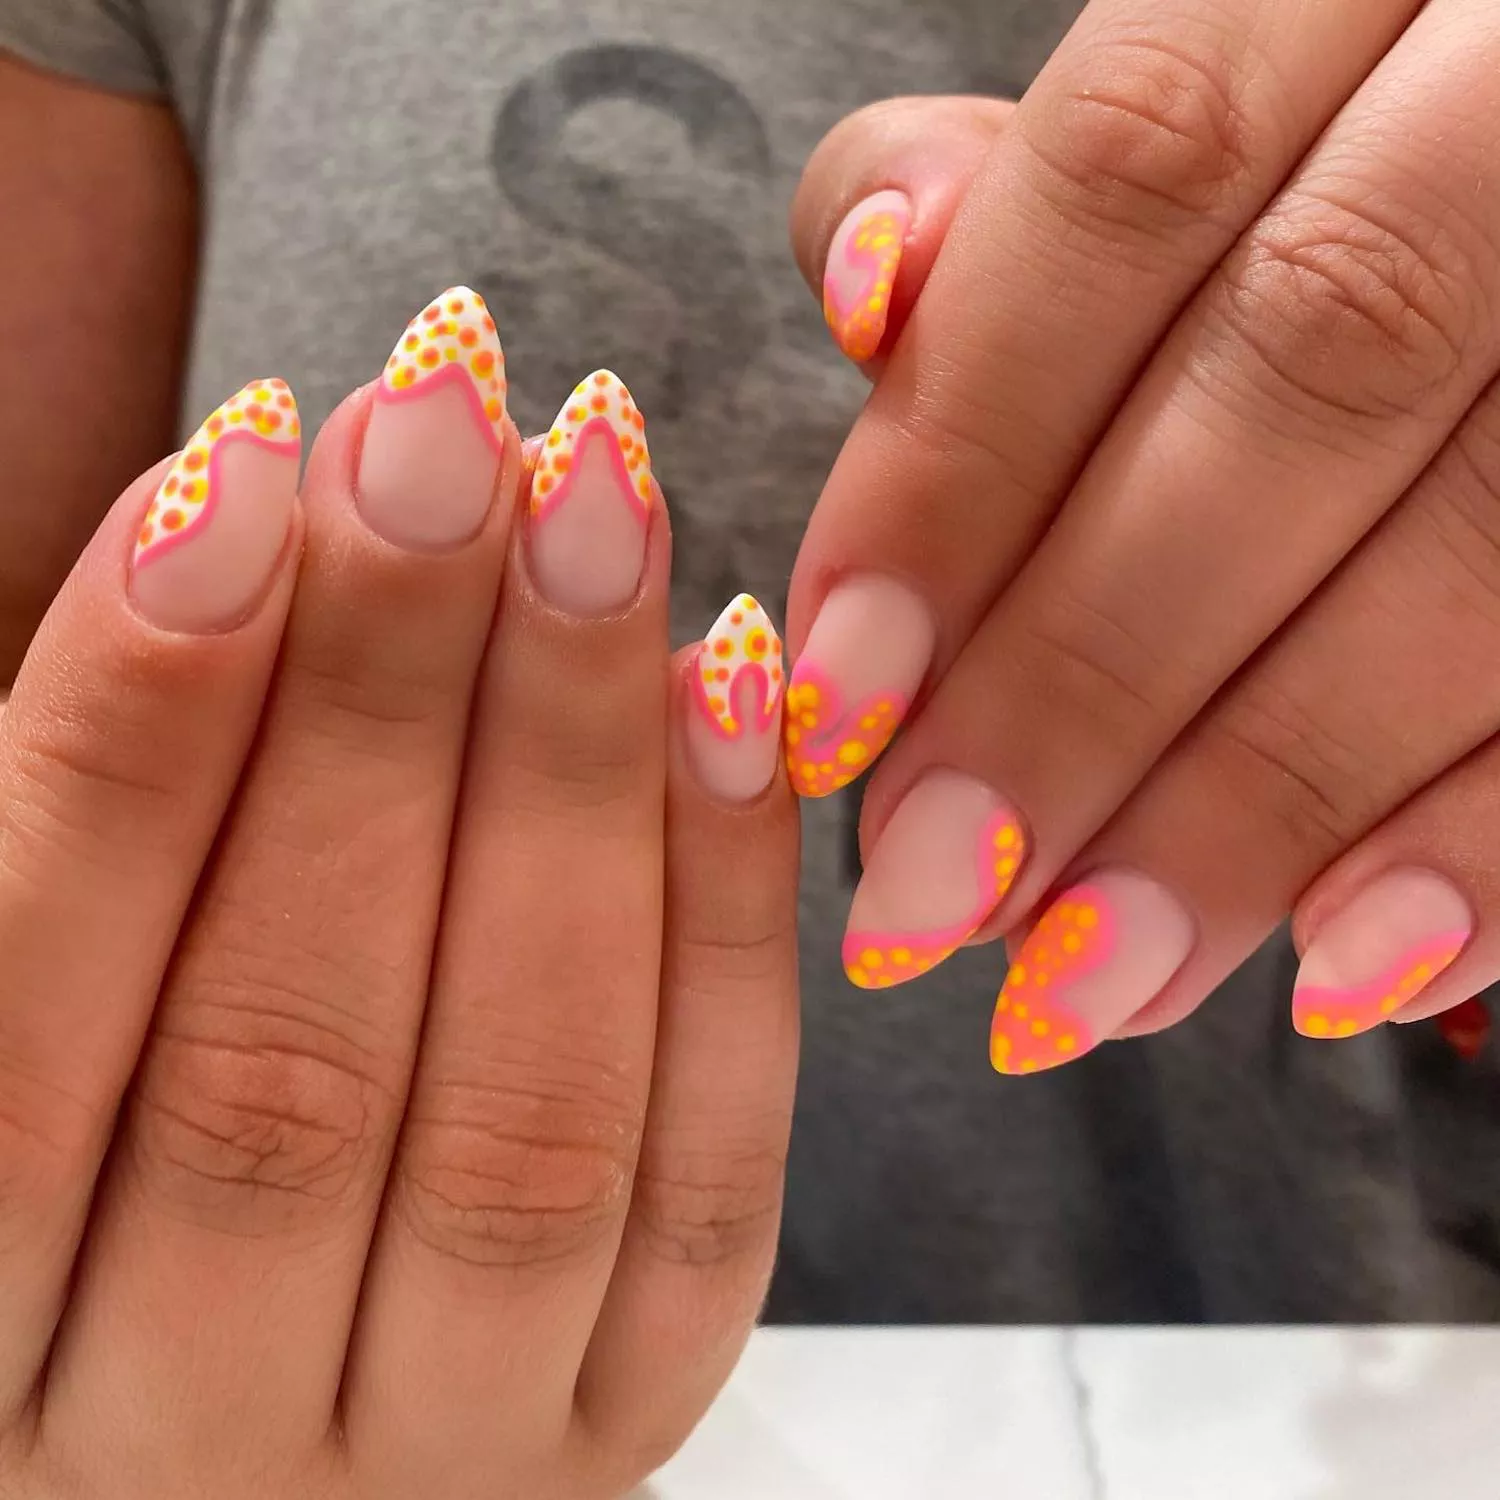 Almond-shaped manicure with pink, yellow, and white wavy bubble dot design